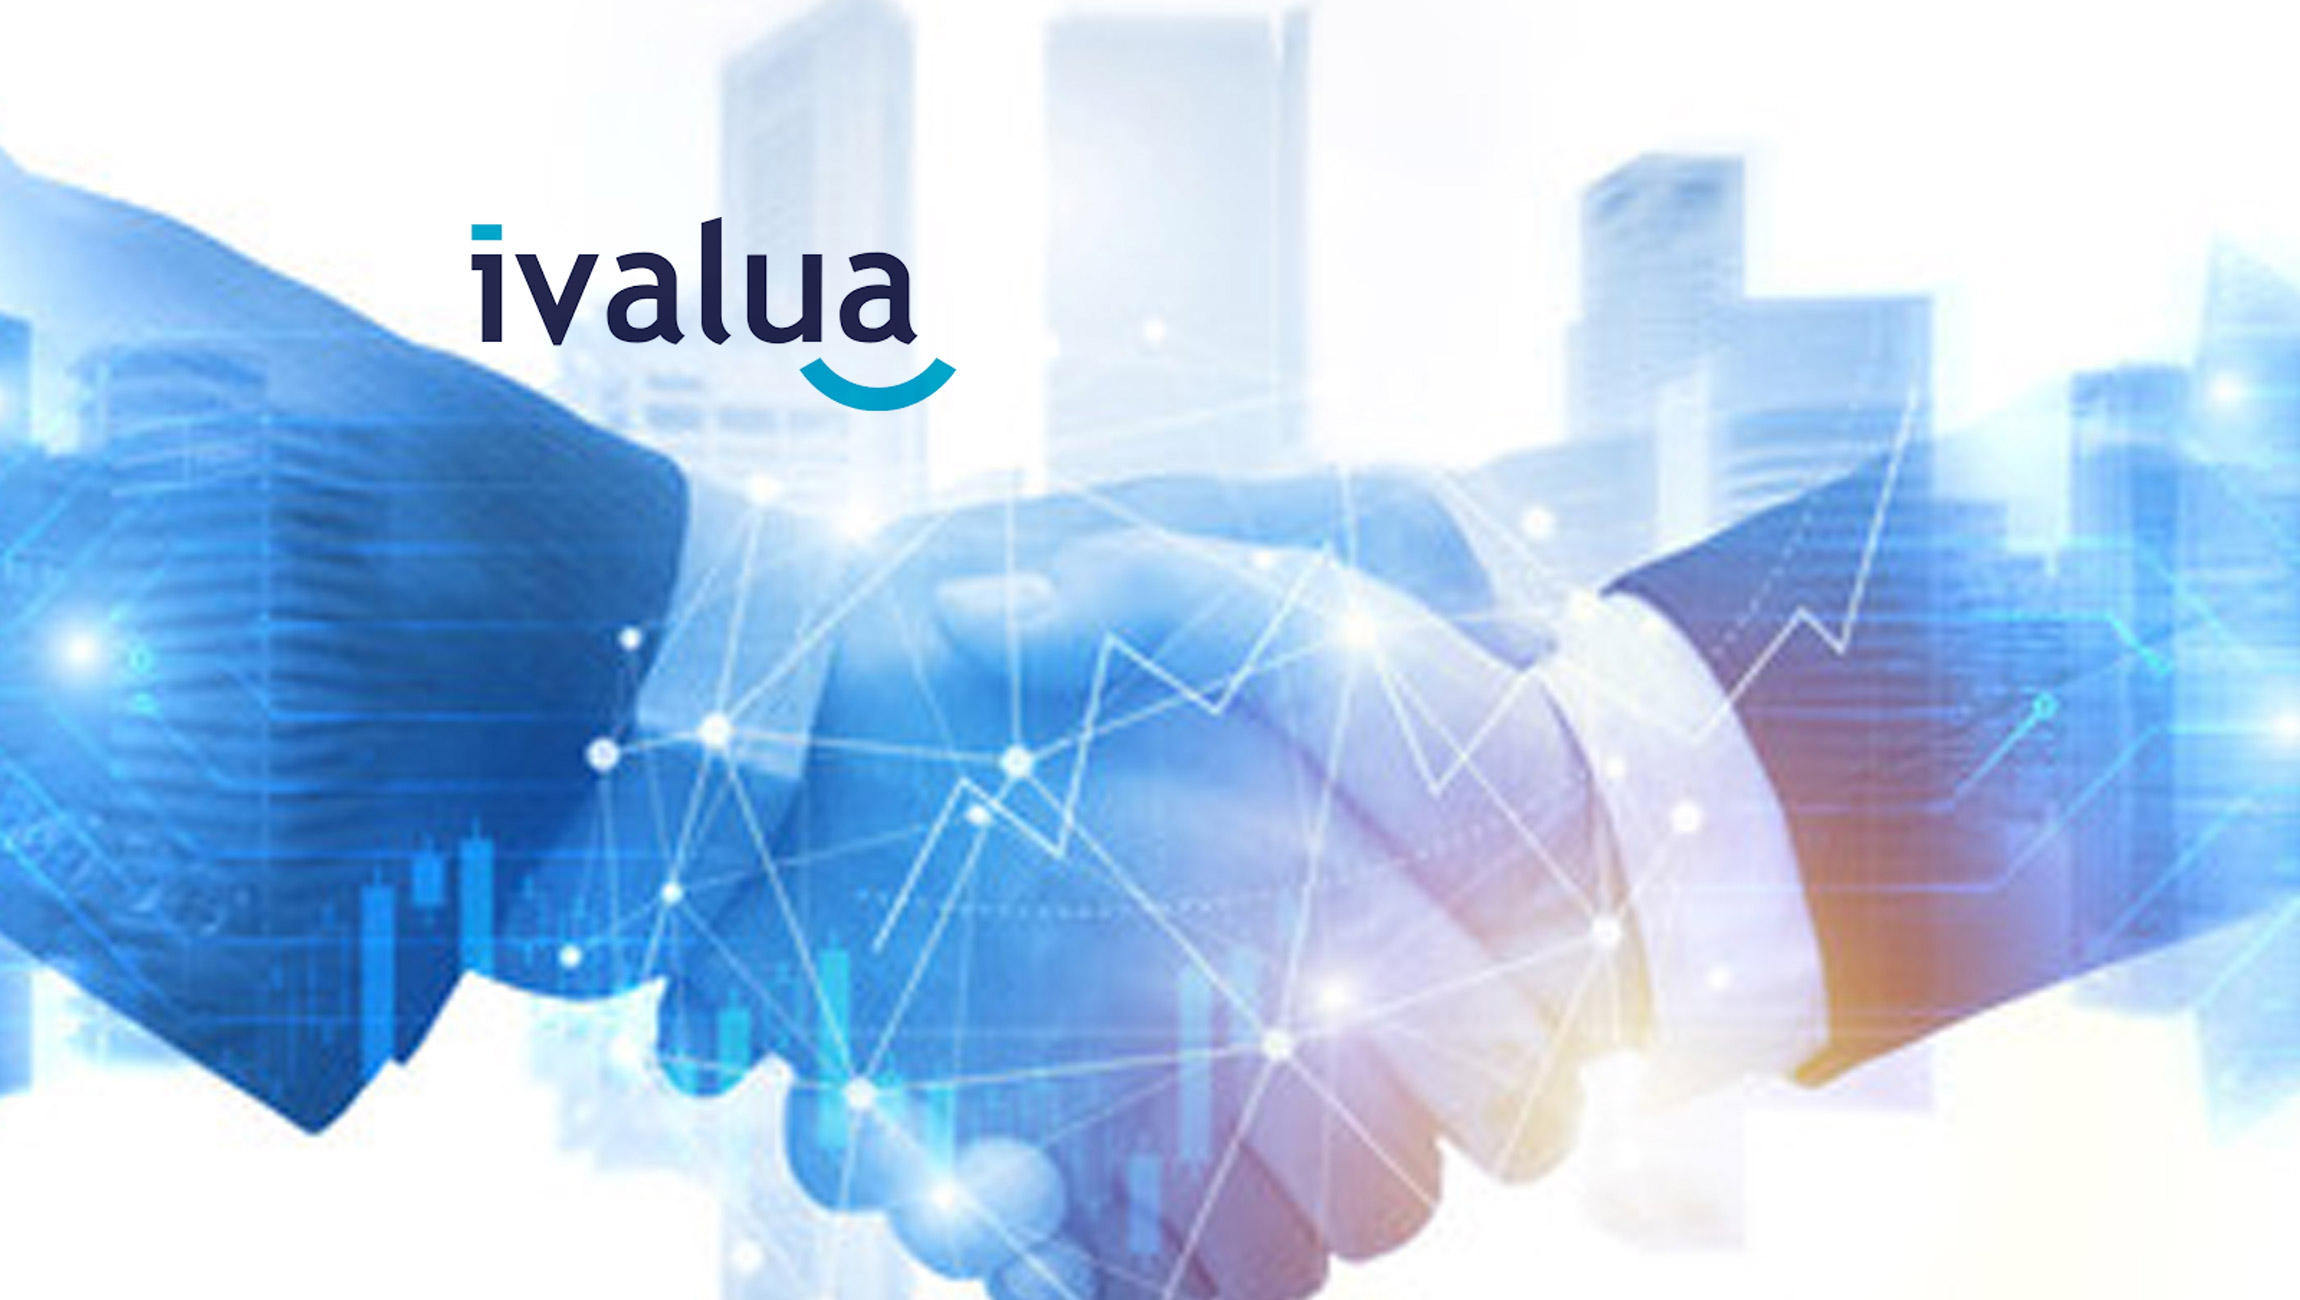 Swedish Steel Manufacturer Selects Ivalua to Further Optimize Procurement Efficiency and Mitigate Supply Chain Risk